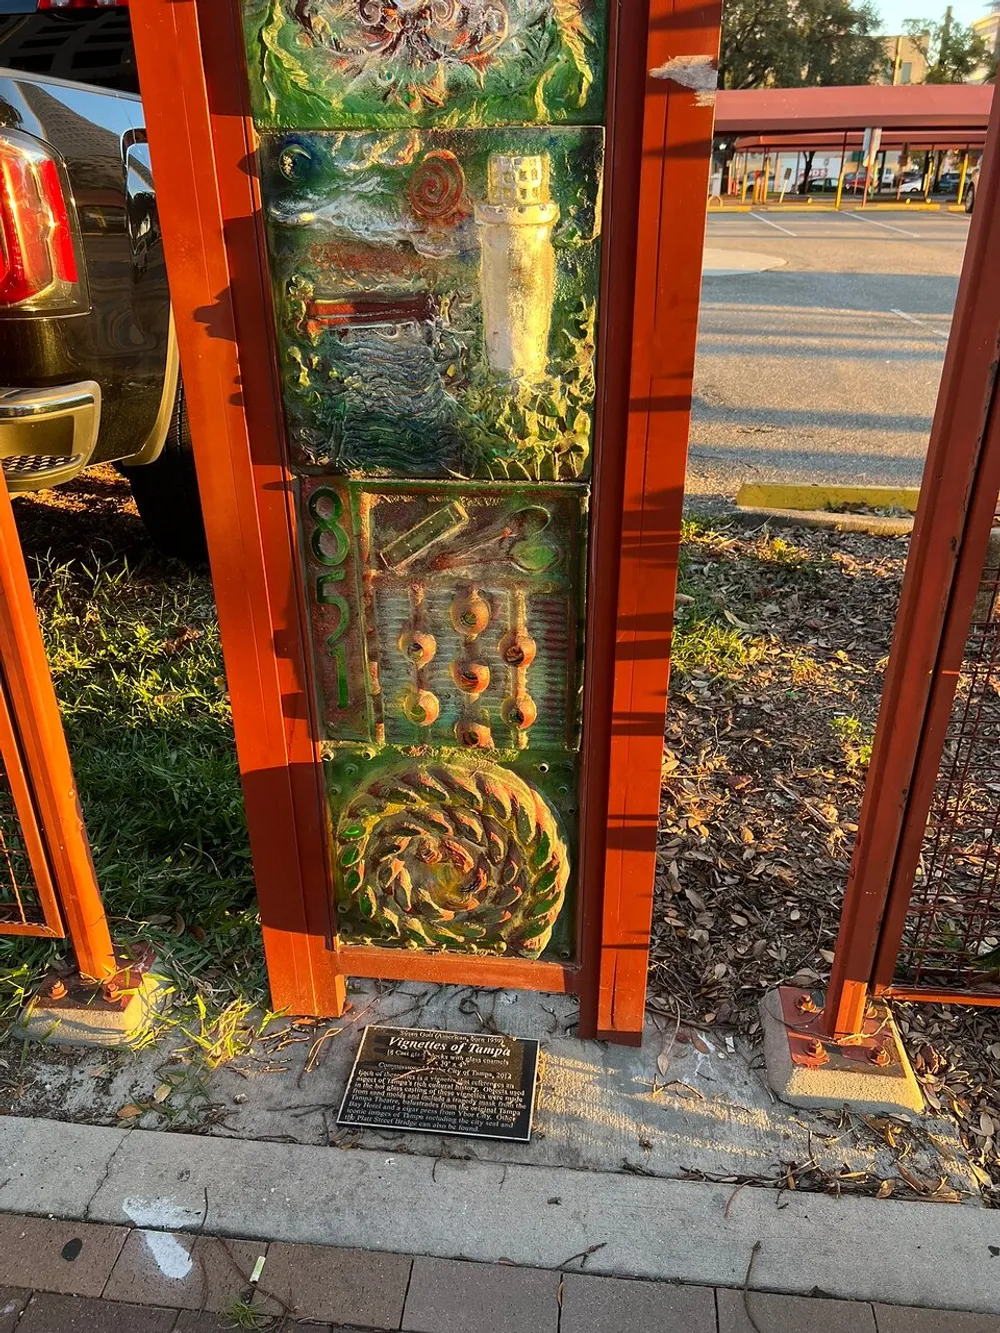 The image shows an ornate colorful sculptural panel within an orange frame installed outdoors near a sidewalk with a plaque titled Figurines of Tampa at its base